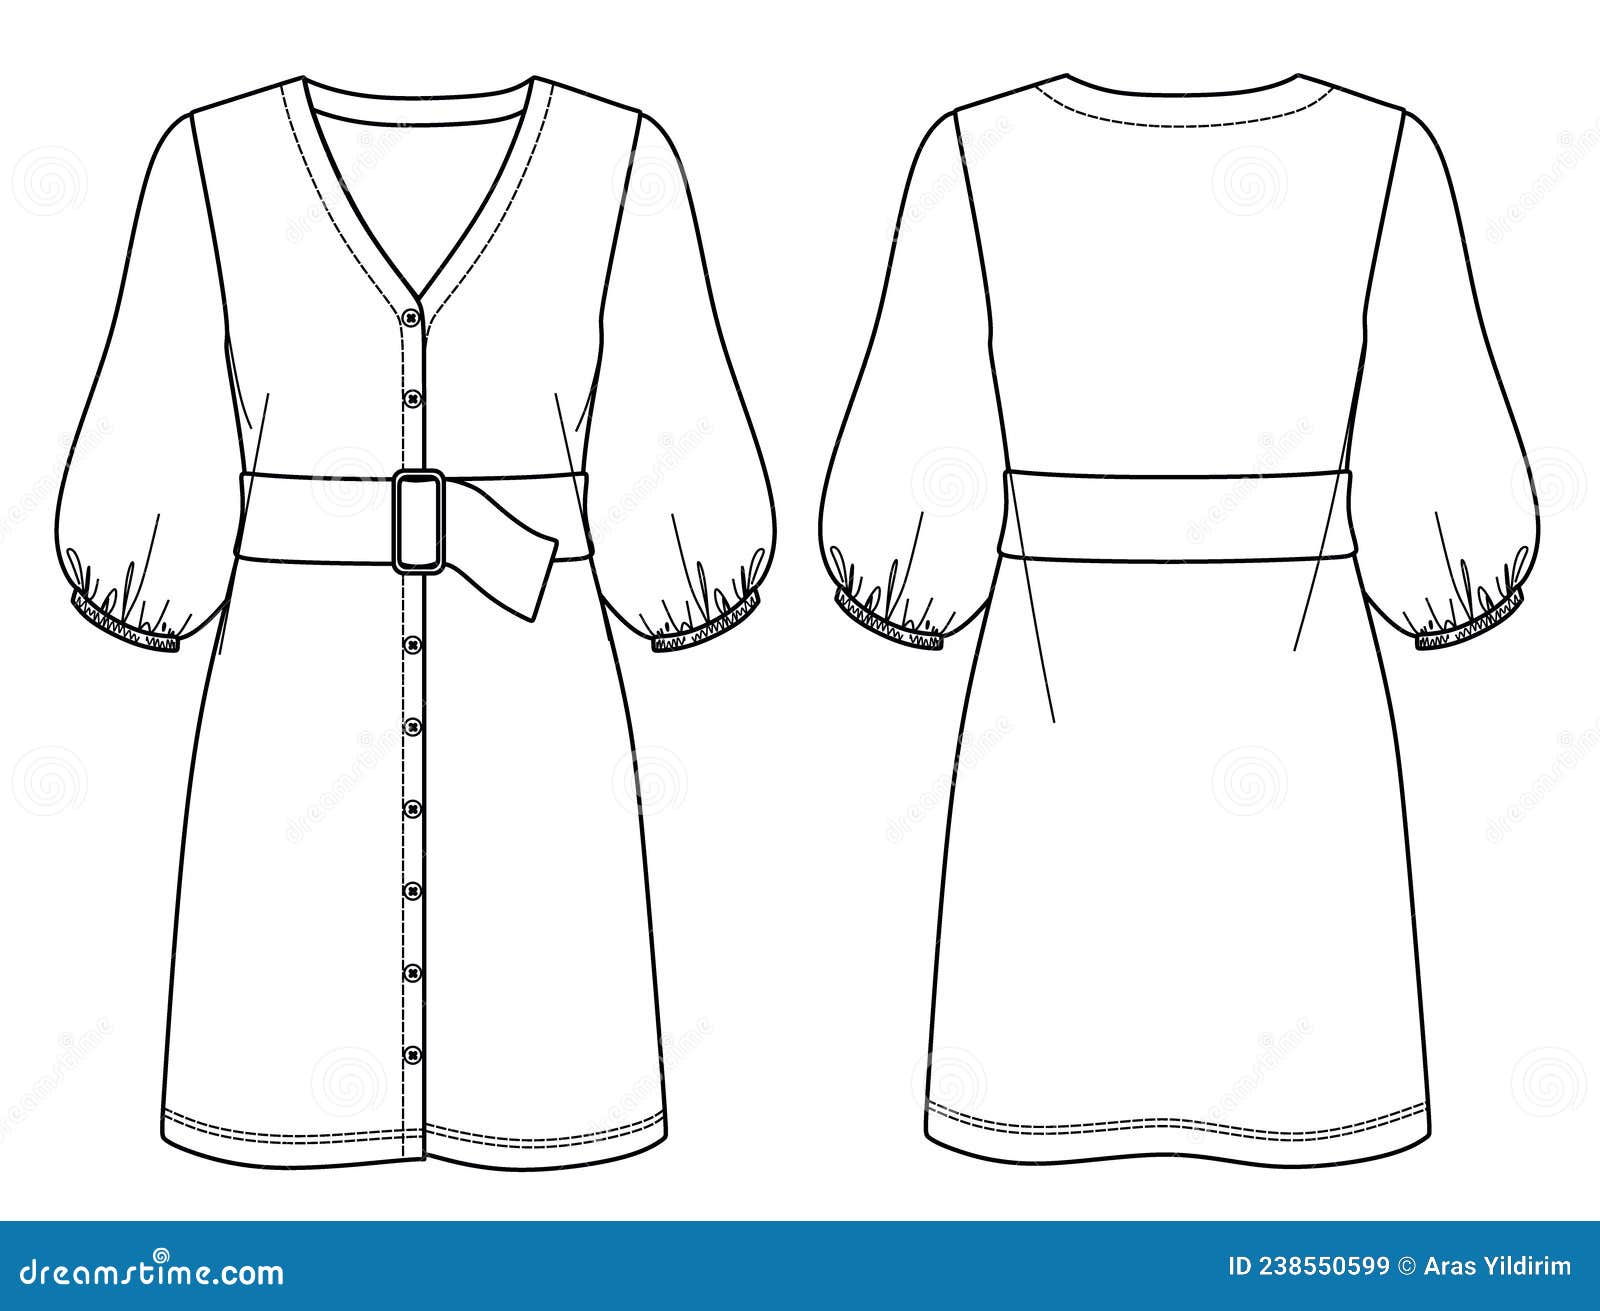 Shirt-dress Sketch with Buttons Stock Vector - Illustration of shirt ...